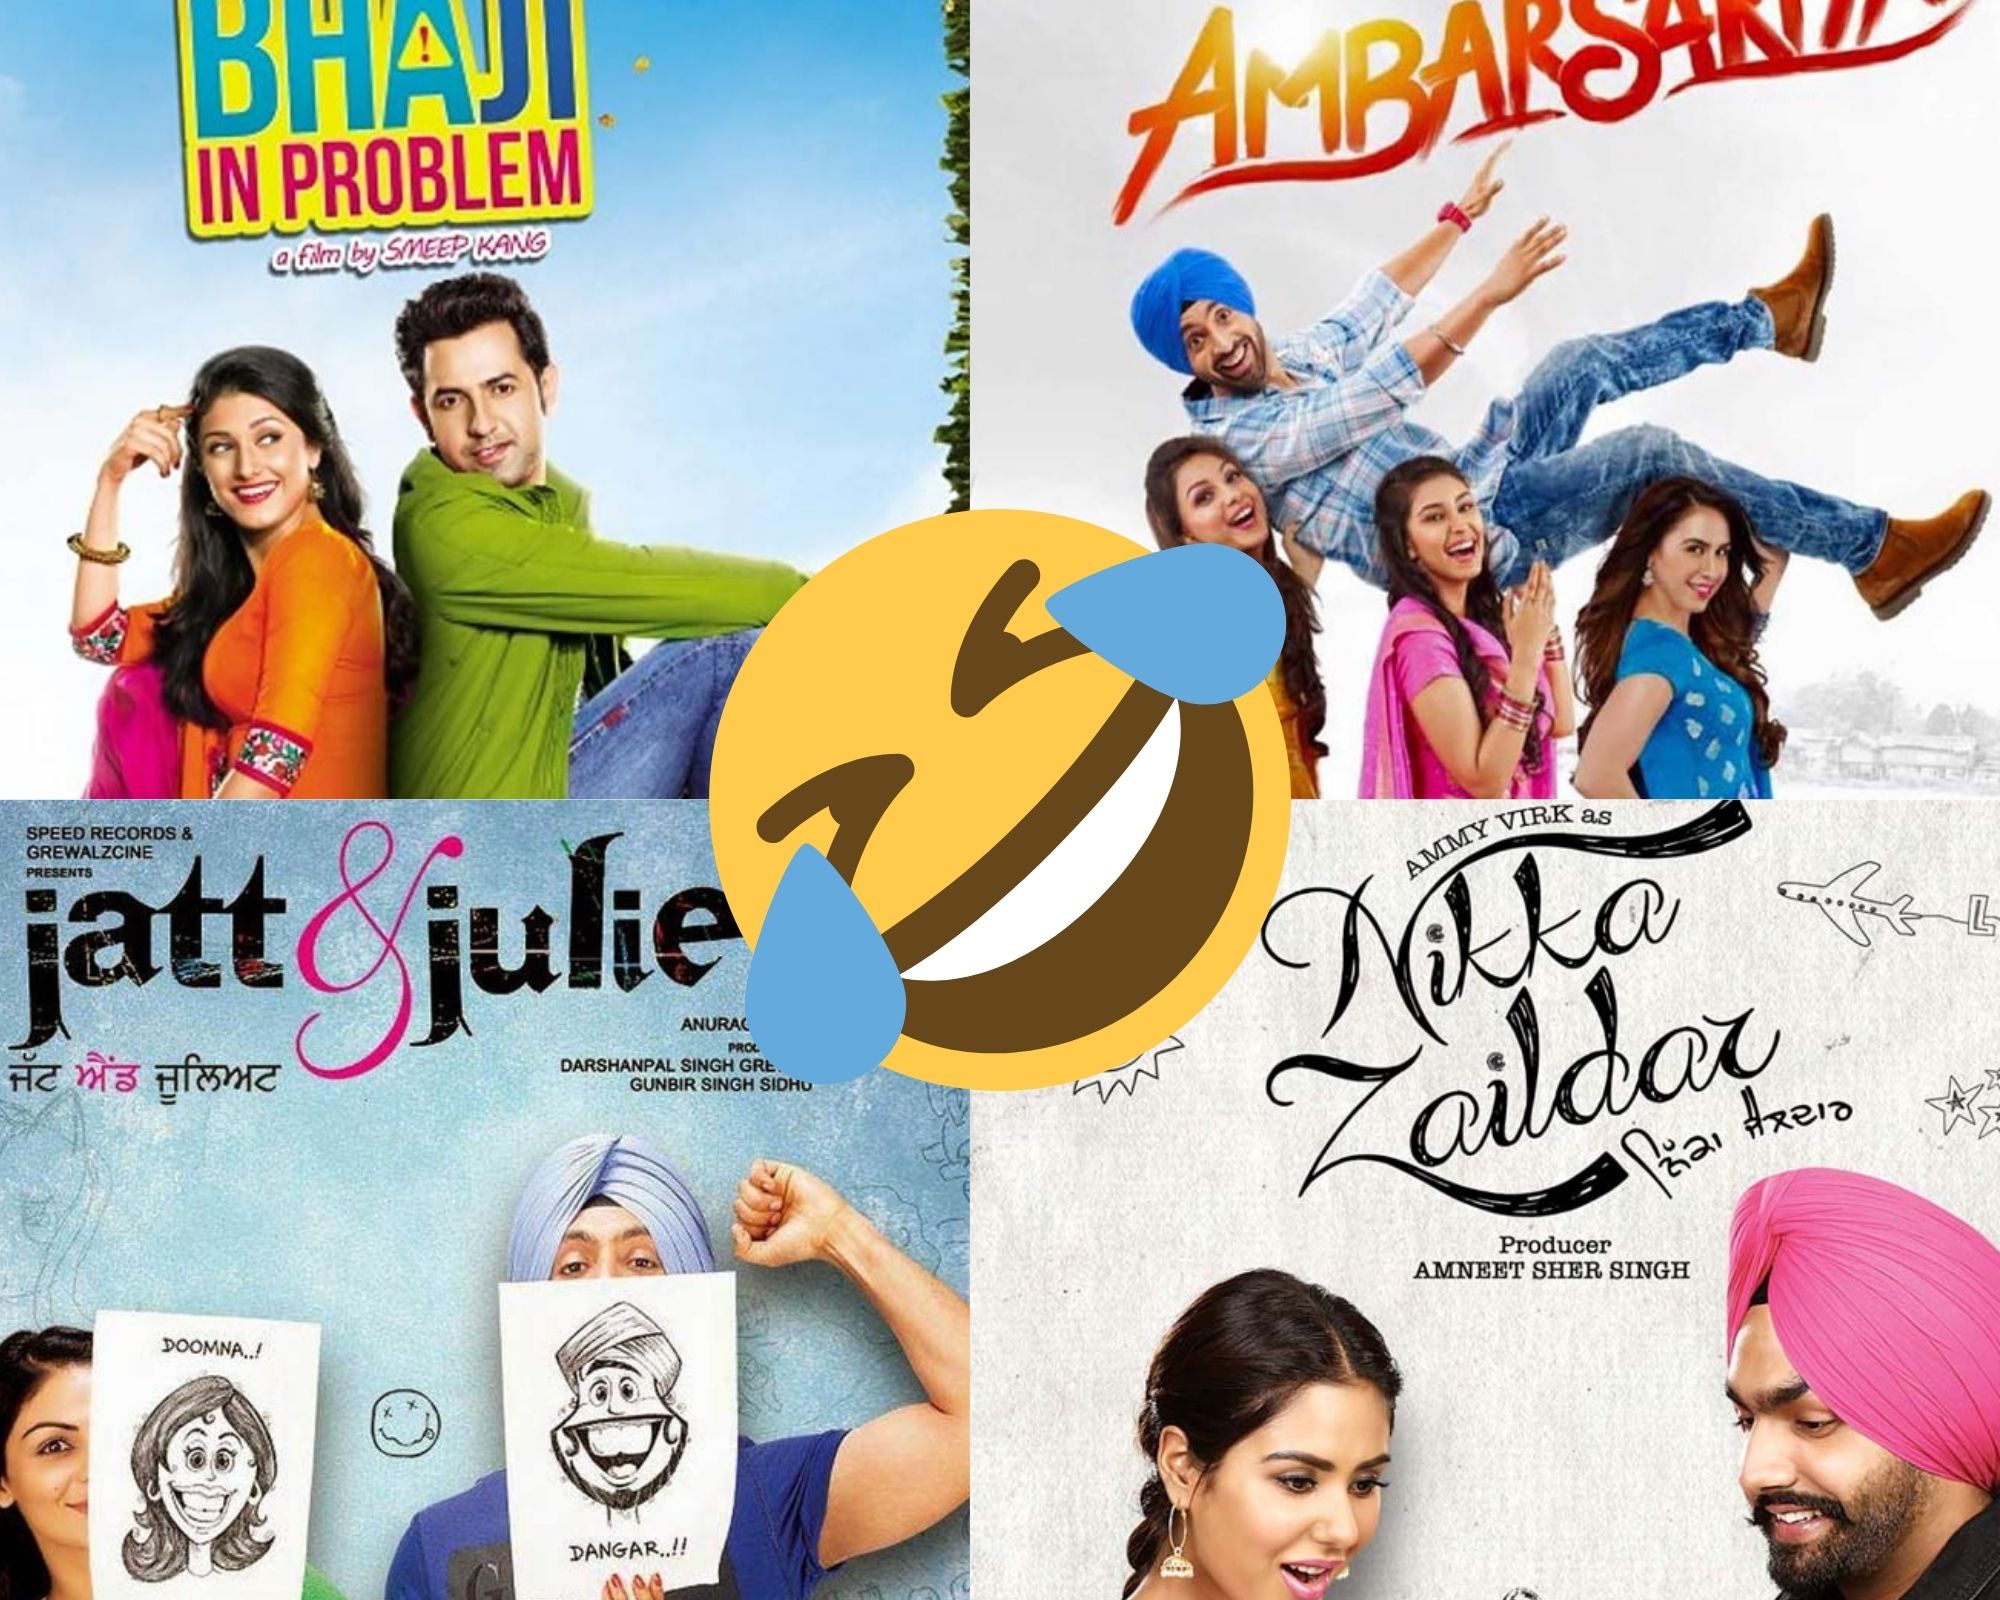 10 Hilarious Punjabi Comedy Movies that will make you laugh for hours....